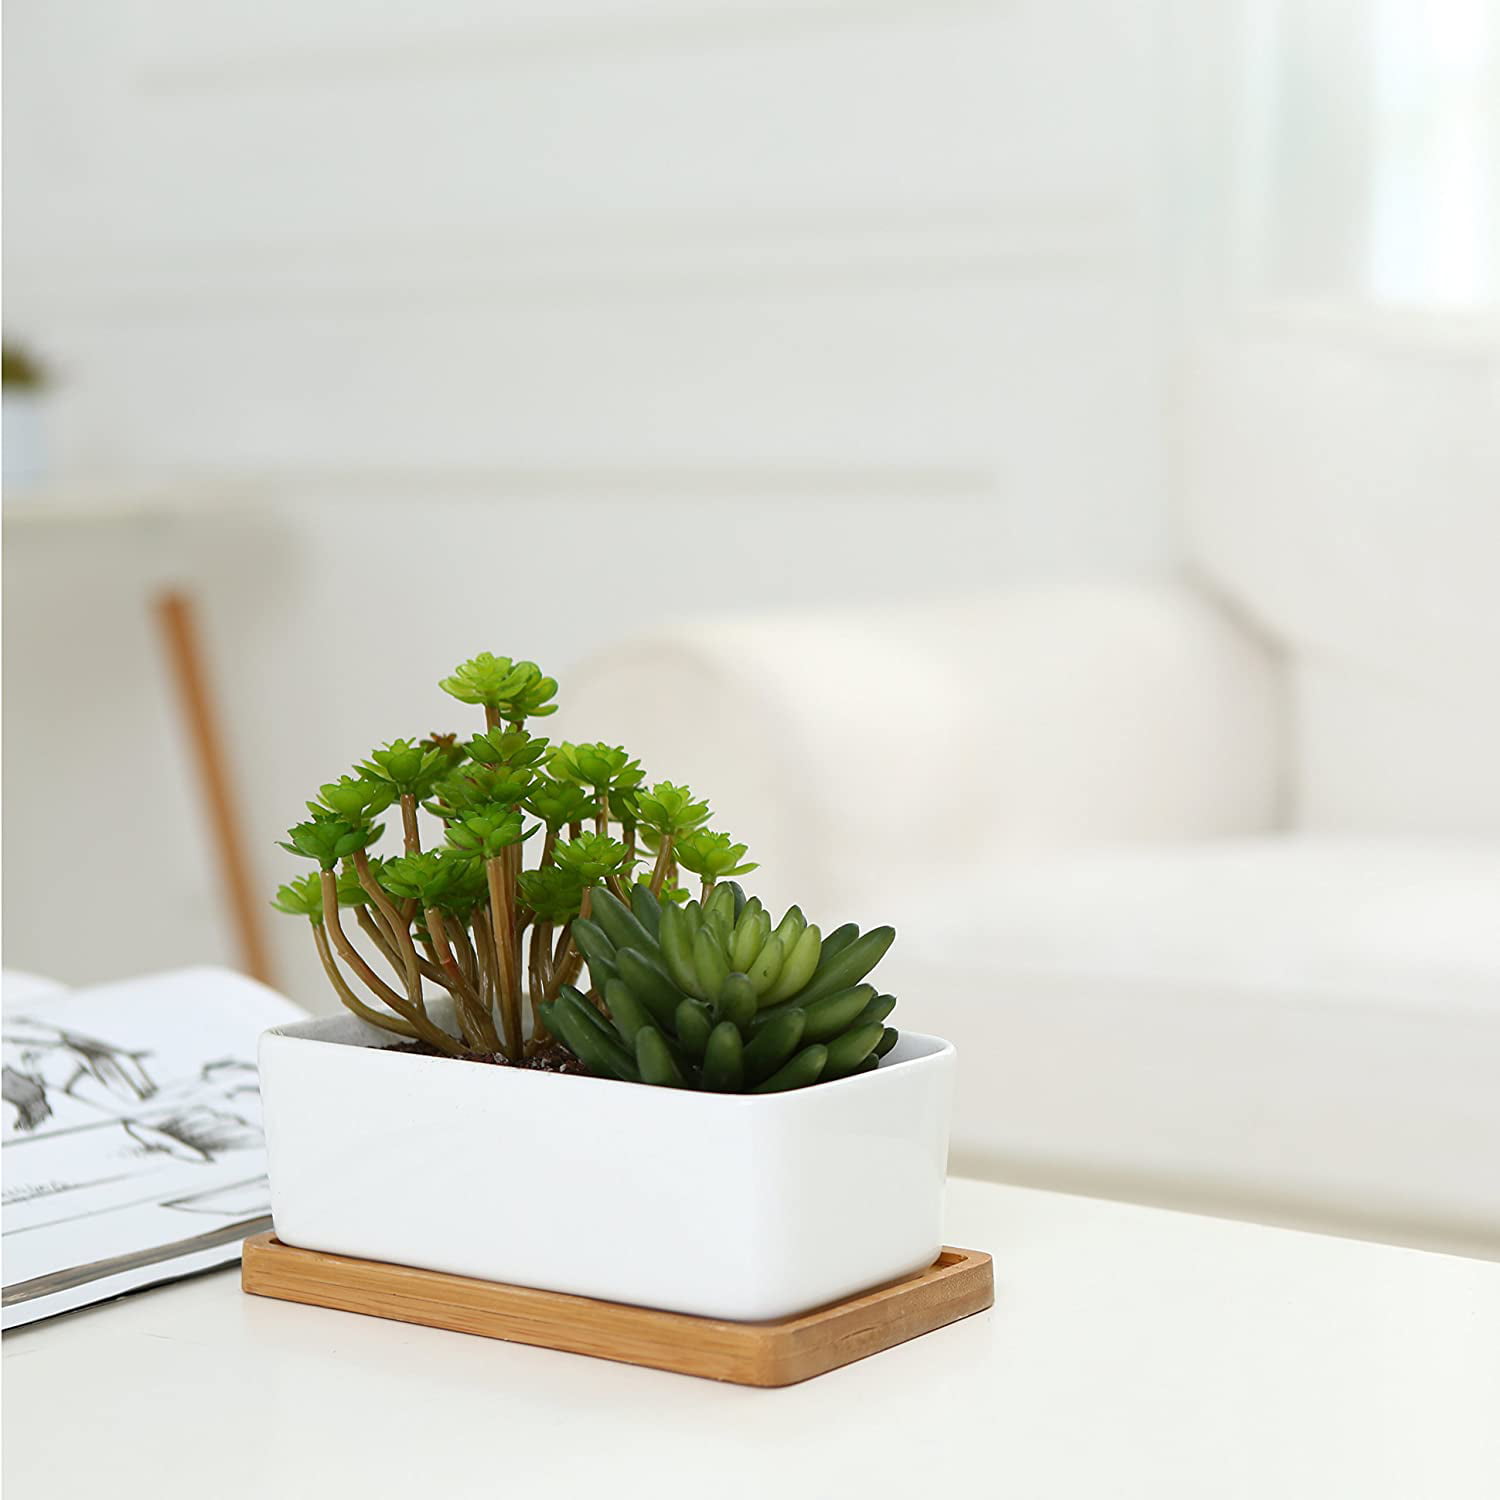 MyGift Set of 2 Modern Geometric White Ceramic Mini Succulent Planter Pots with Removable Bamboo Saucer 